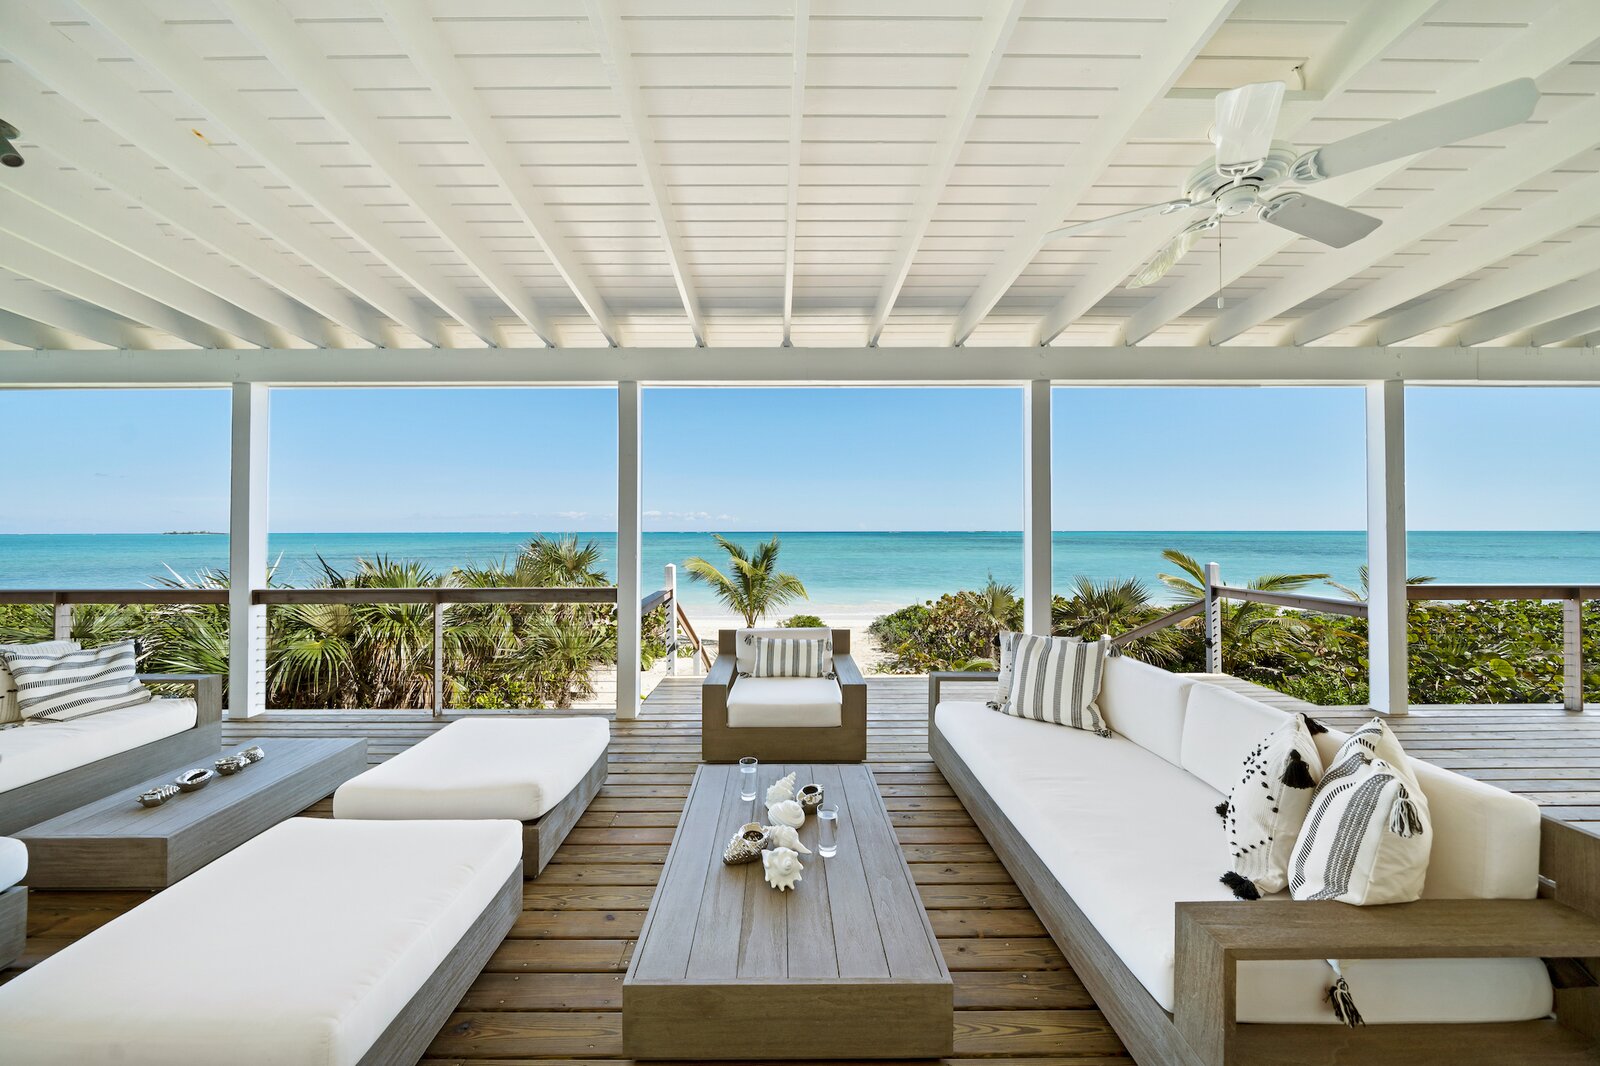 Beachfront Bahamian Haven on a Lush Private Island